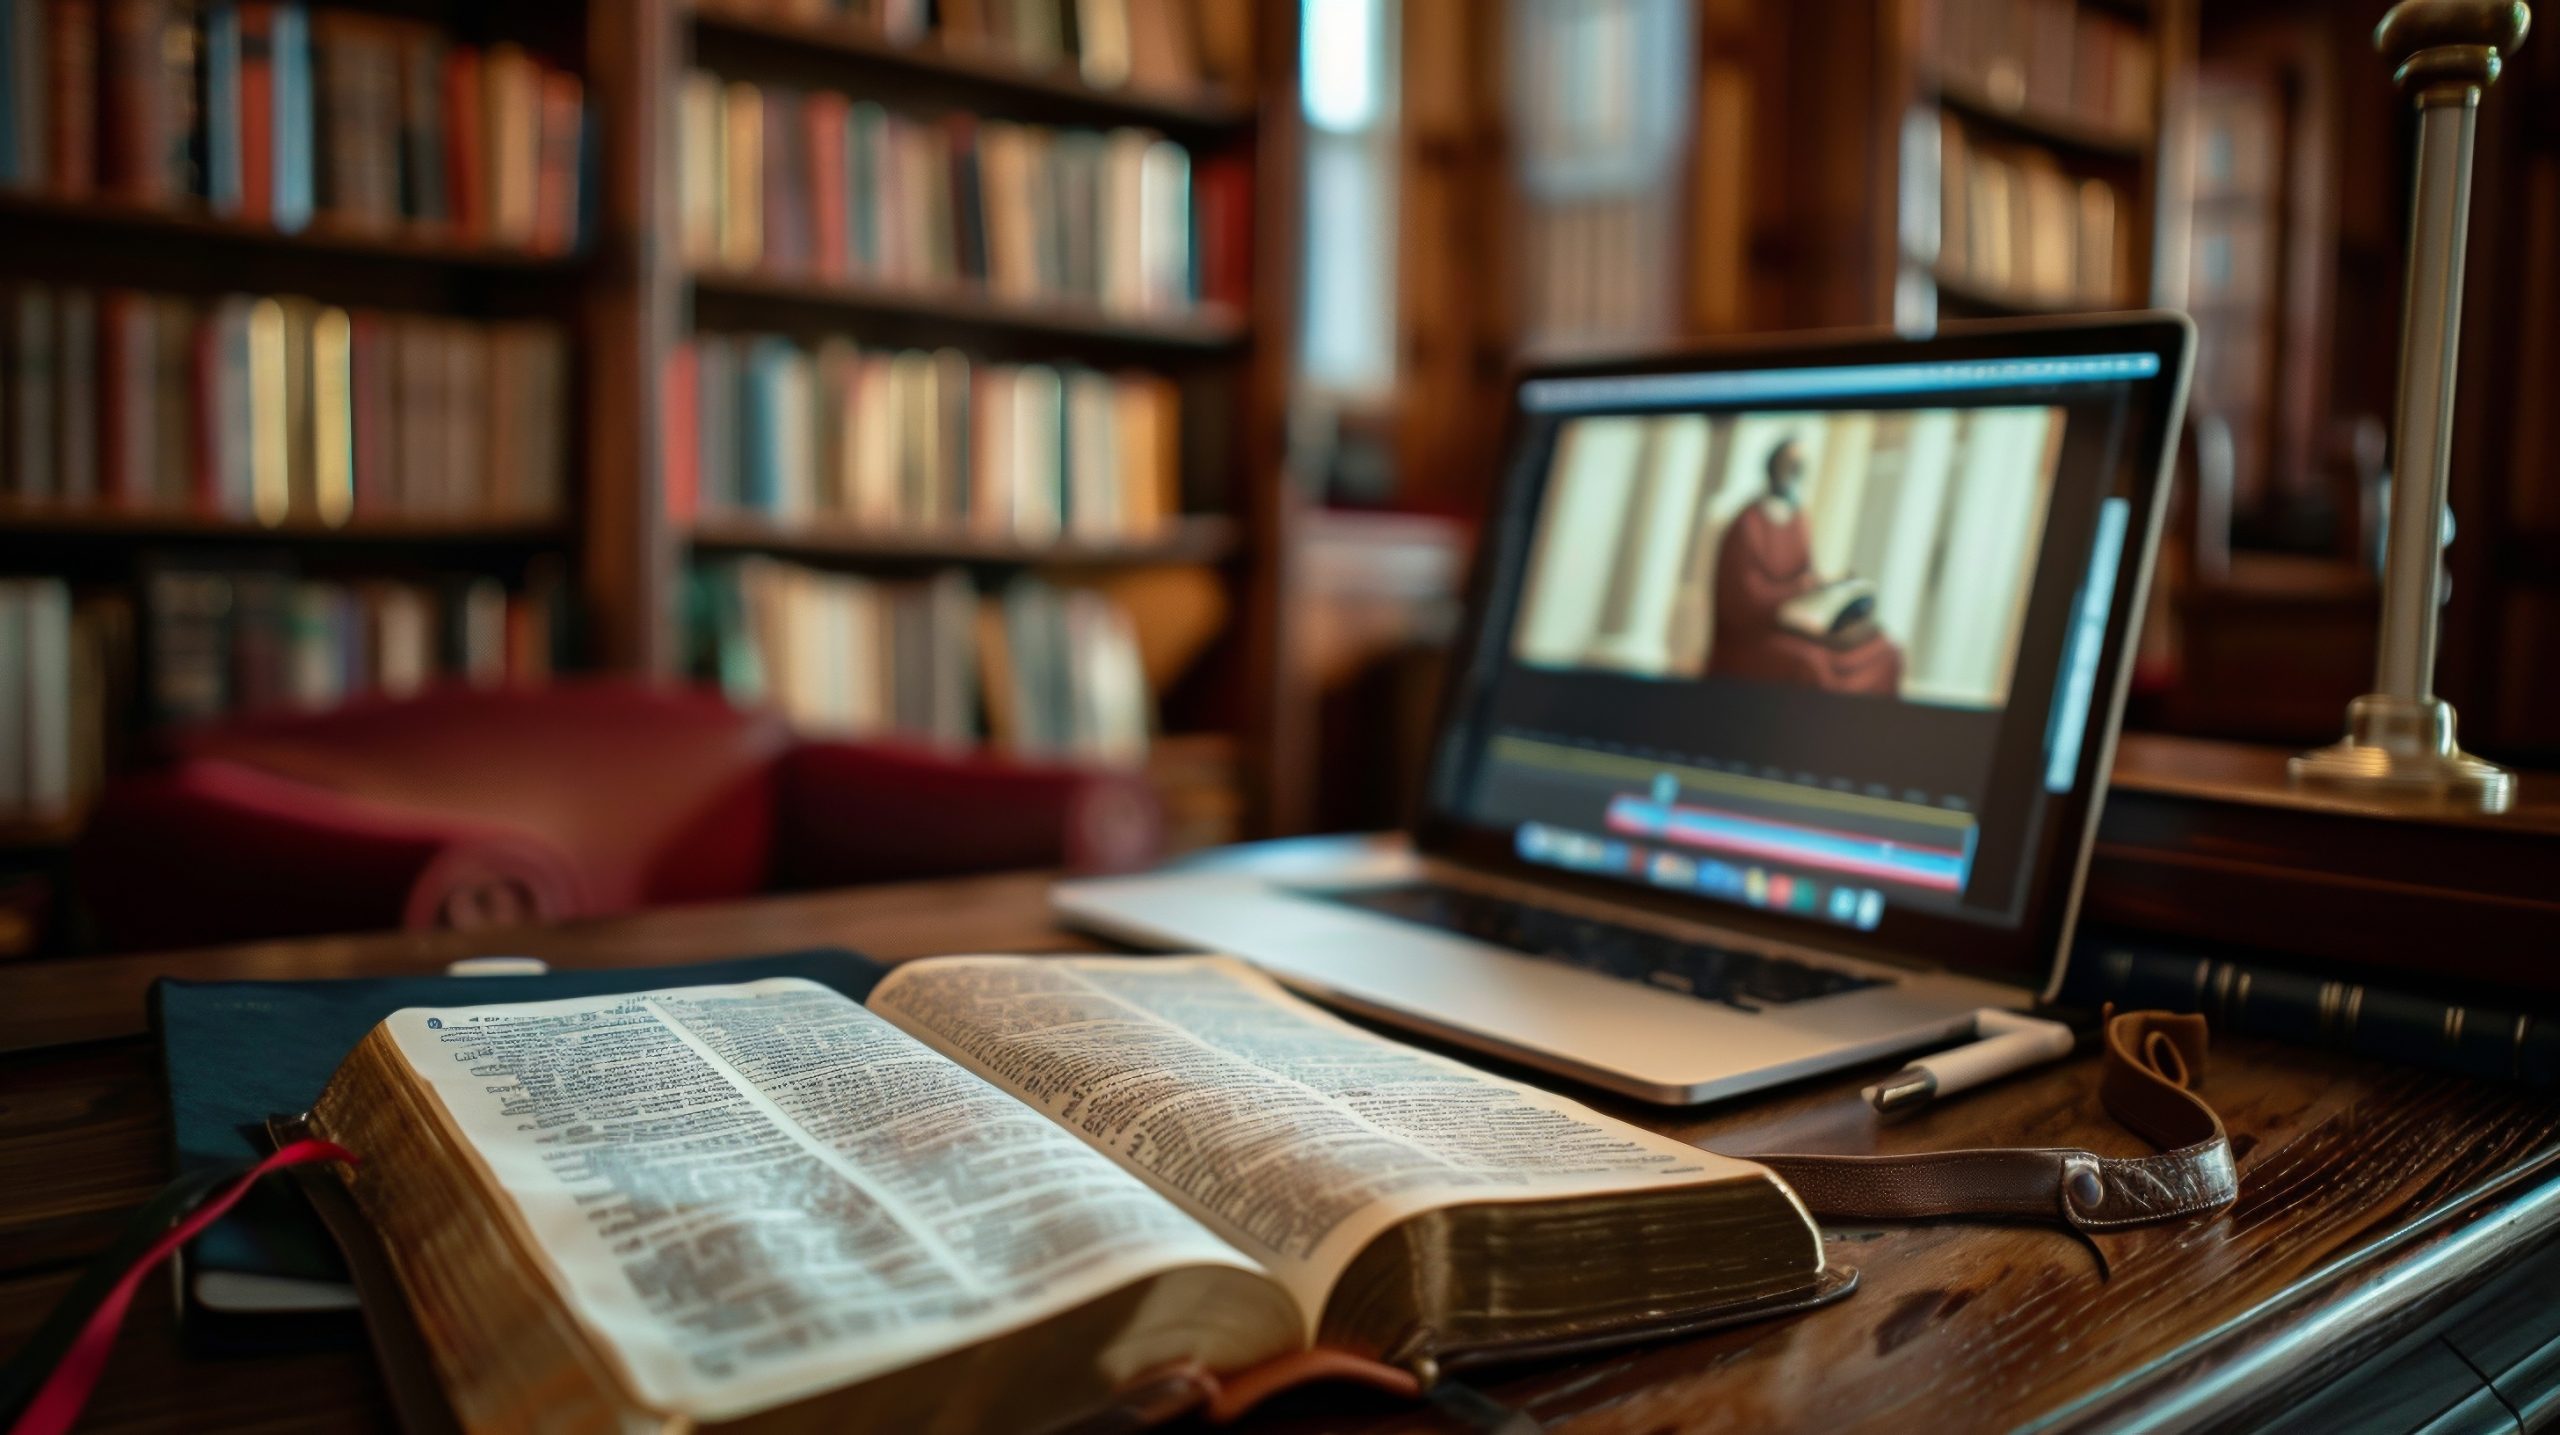 Religious programming viewed on laptop with bible opened in foreground via internet connection provided by Kinetic Business